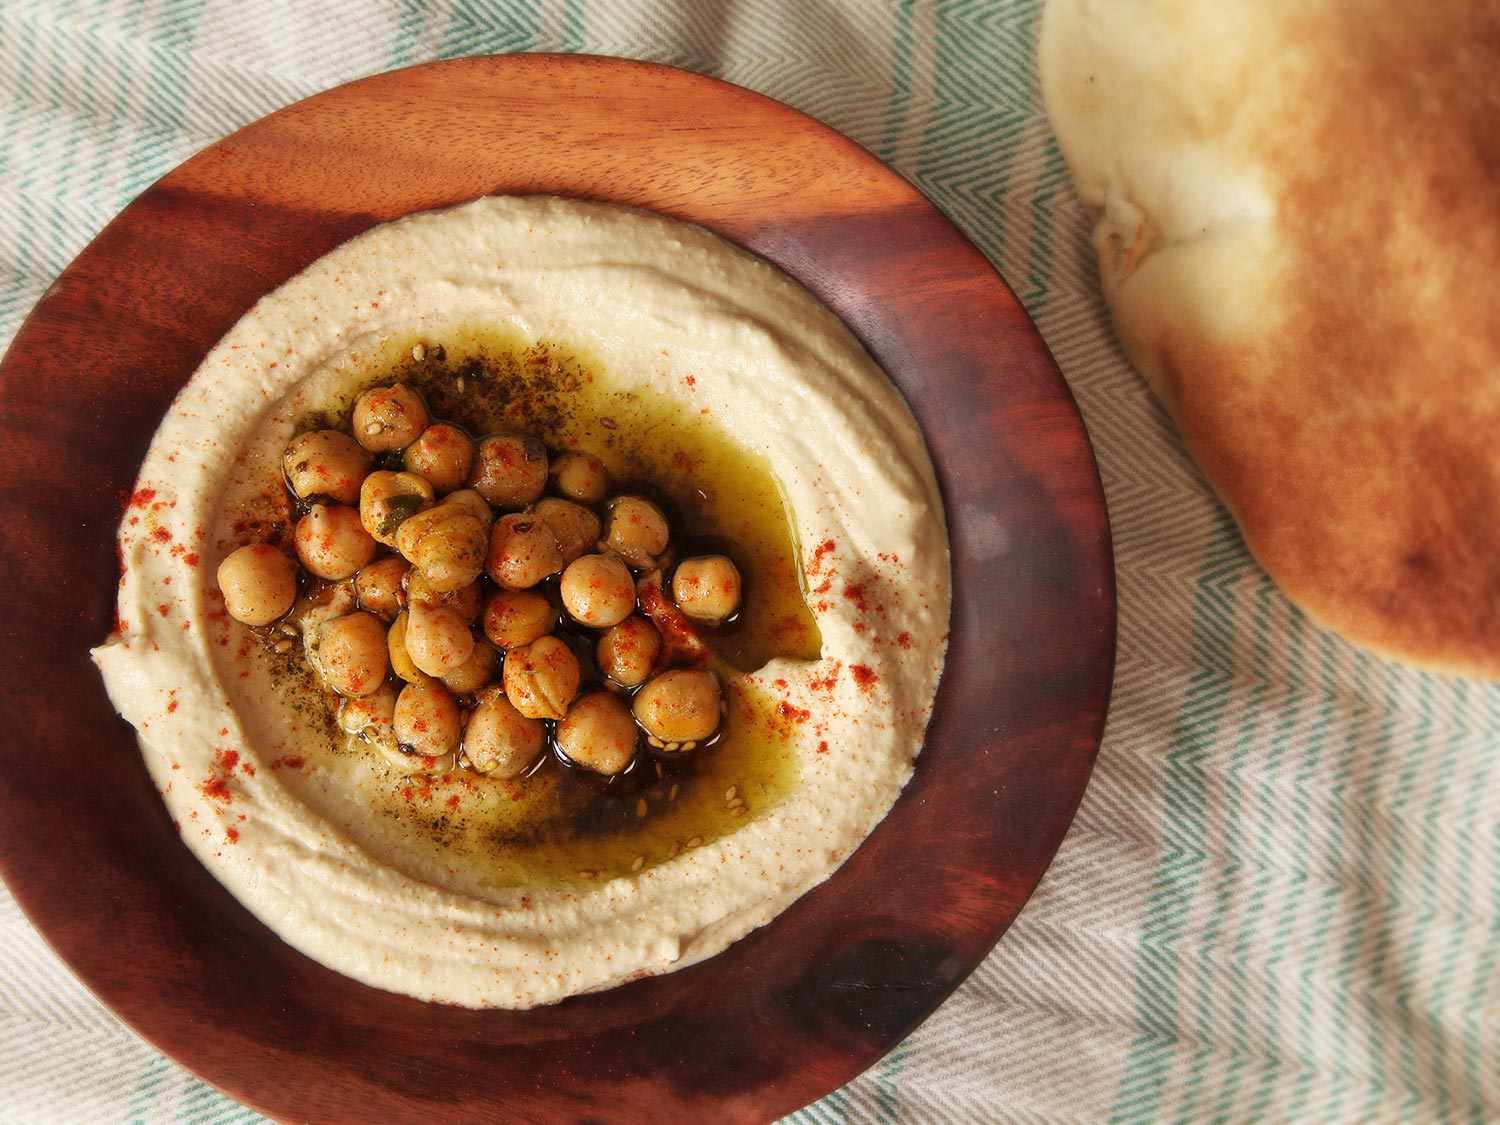 Overhead photograph of smooth Israeli-style hummus topped with chickpeas, olive oil, za'atar, and paprika, with pita bread in the background.